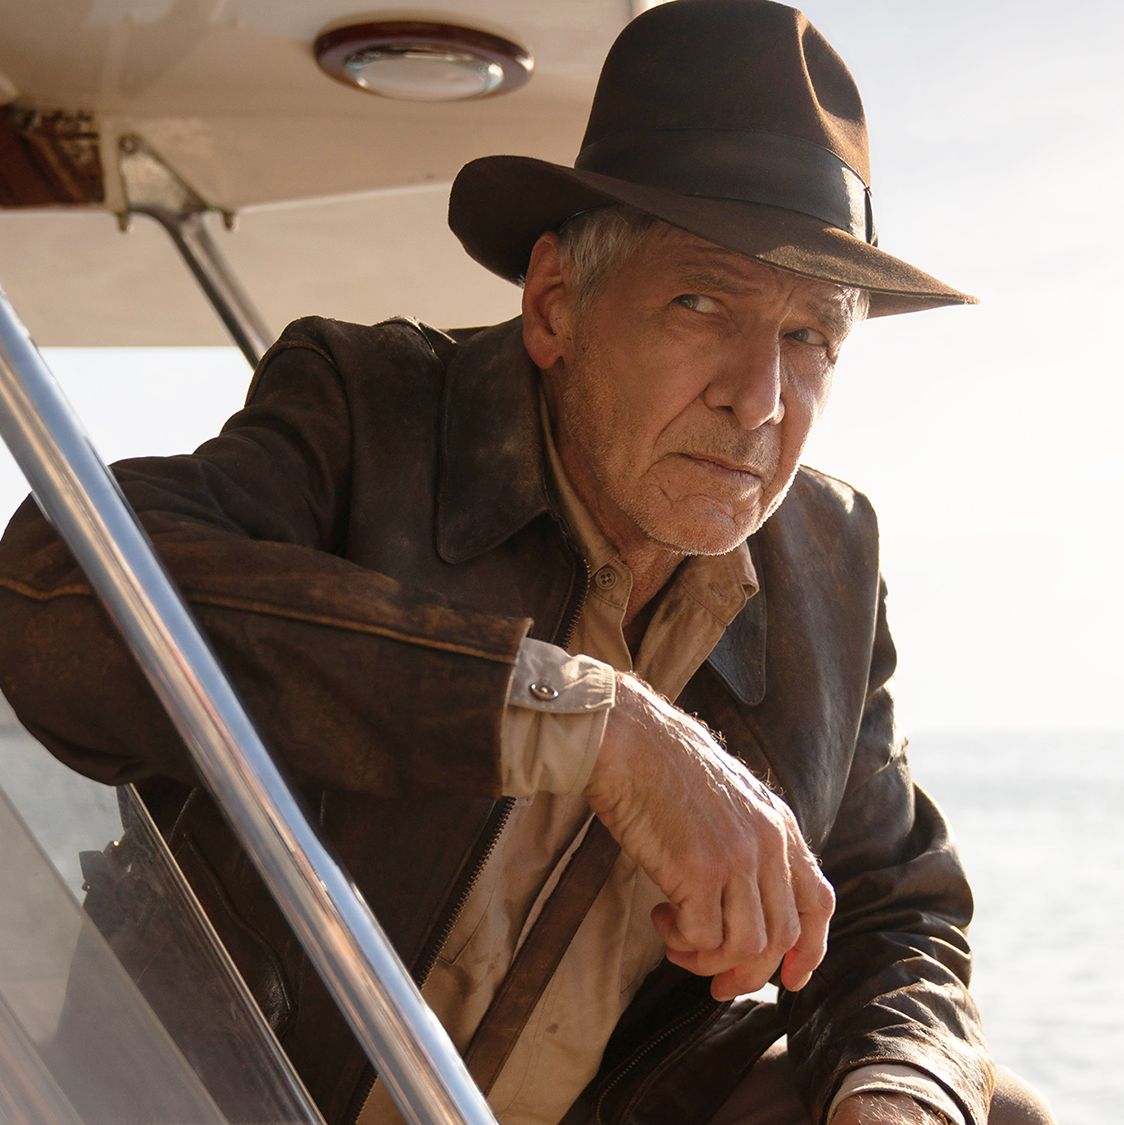 Indiana Jones 5' Ending Explained: Indy Reunites With Marion